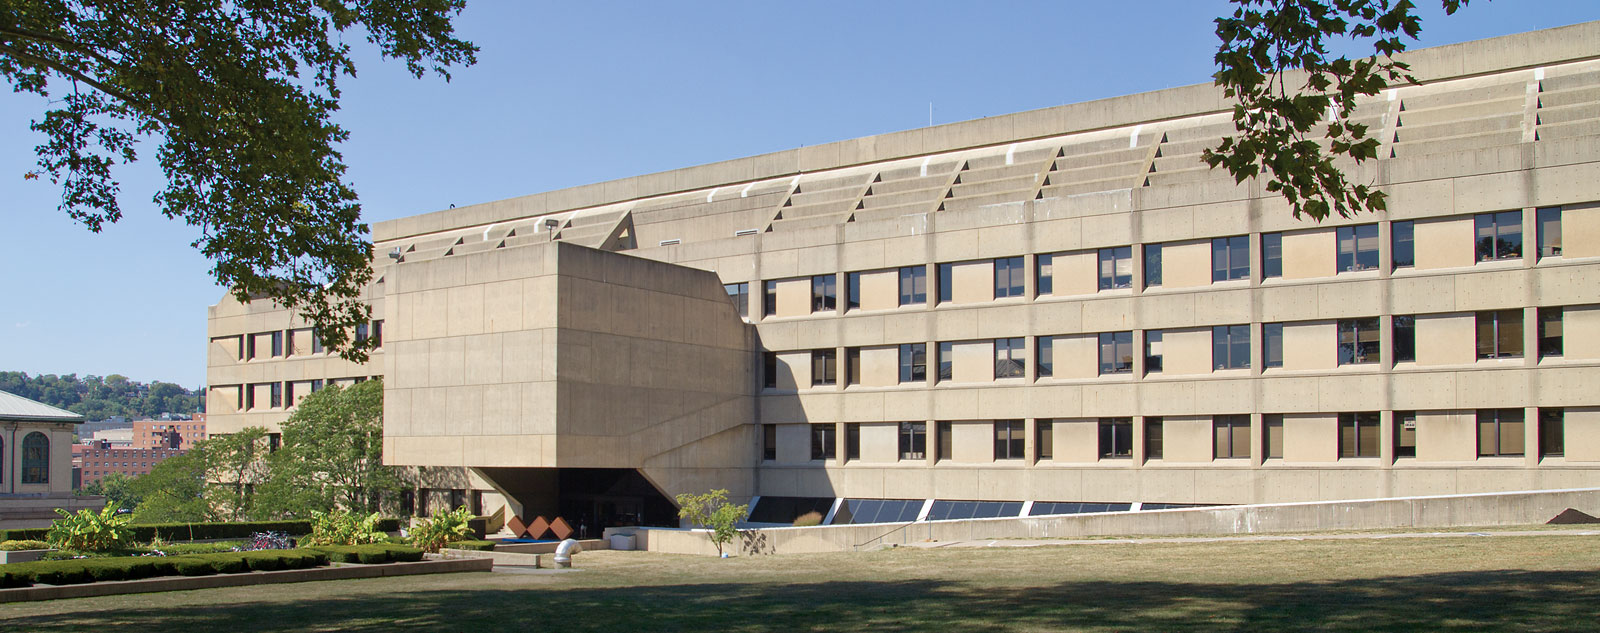 photo of Wean Hall, home of the Department of Mathematical Sciences